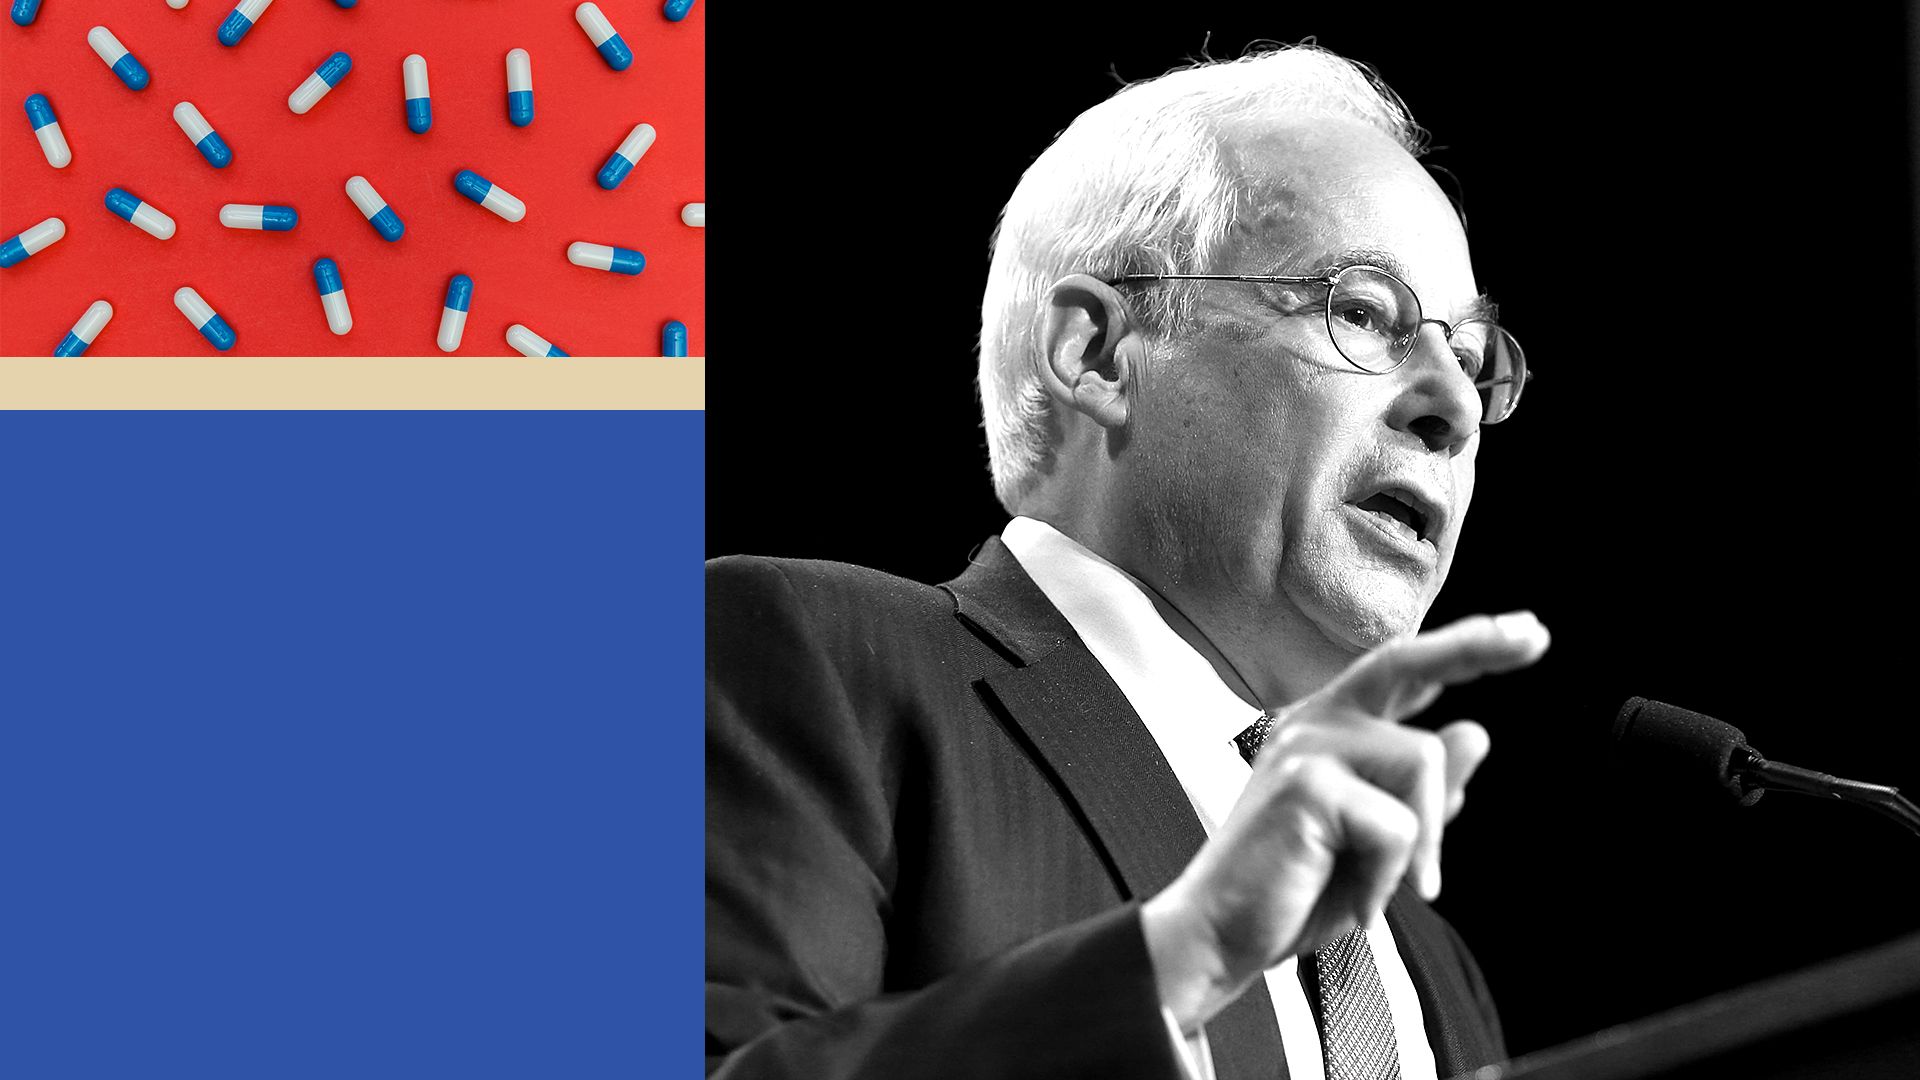 An illustration showing Don Berwick speaking in one panel and prescription drug pills in another panel.